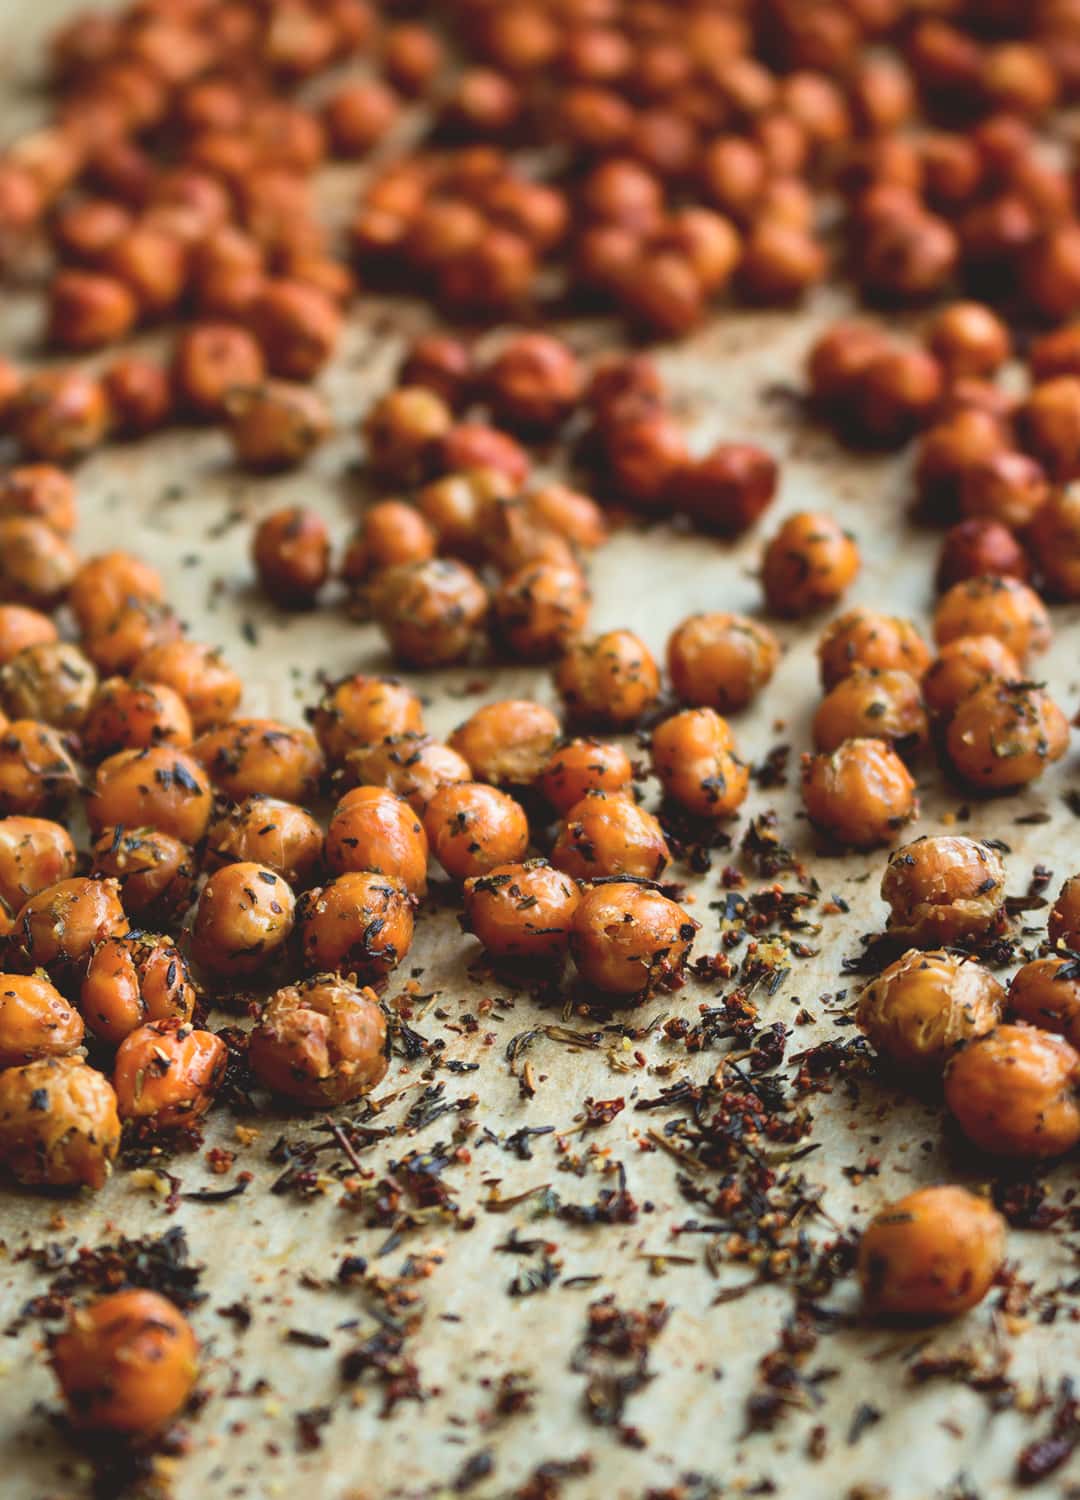 Crunchy Chickpeas 2 ways - healthy snack full of protein! You won't believe how easy it is to make! Full of amazing nurturing ingredients, you'll never eat store bought salty snacks again! Vegan, GF | thehealthfulideas.com